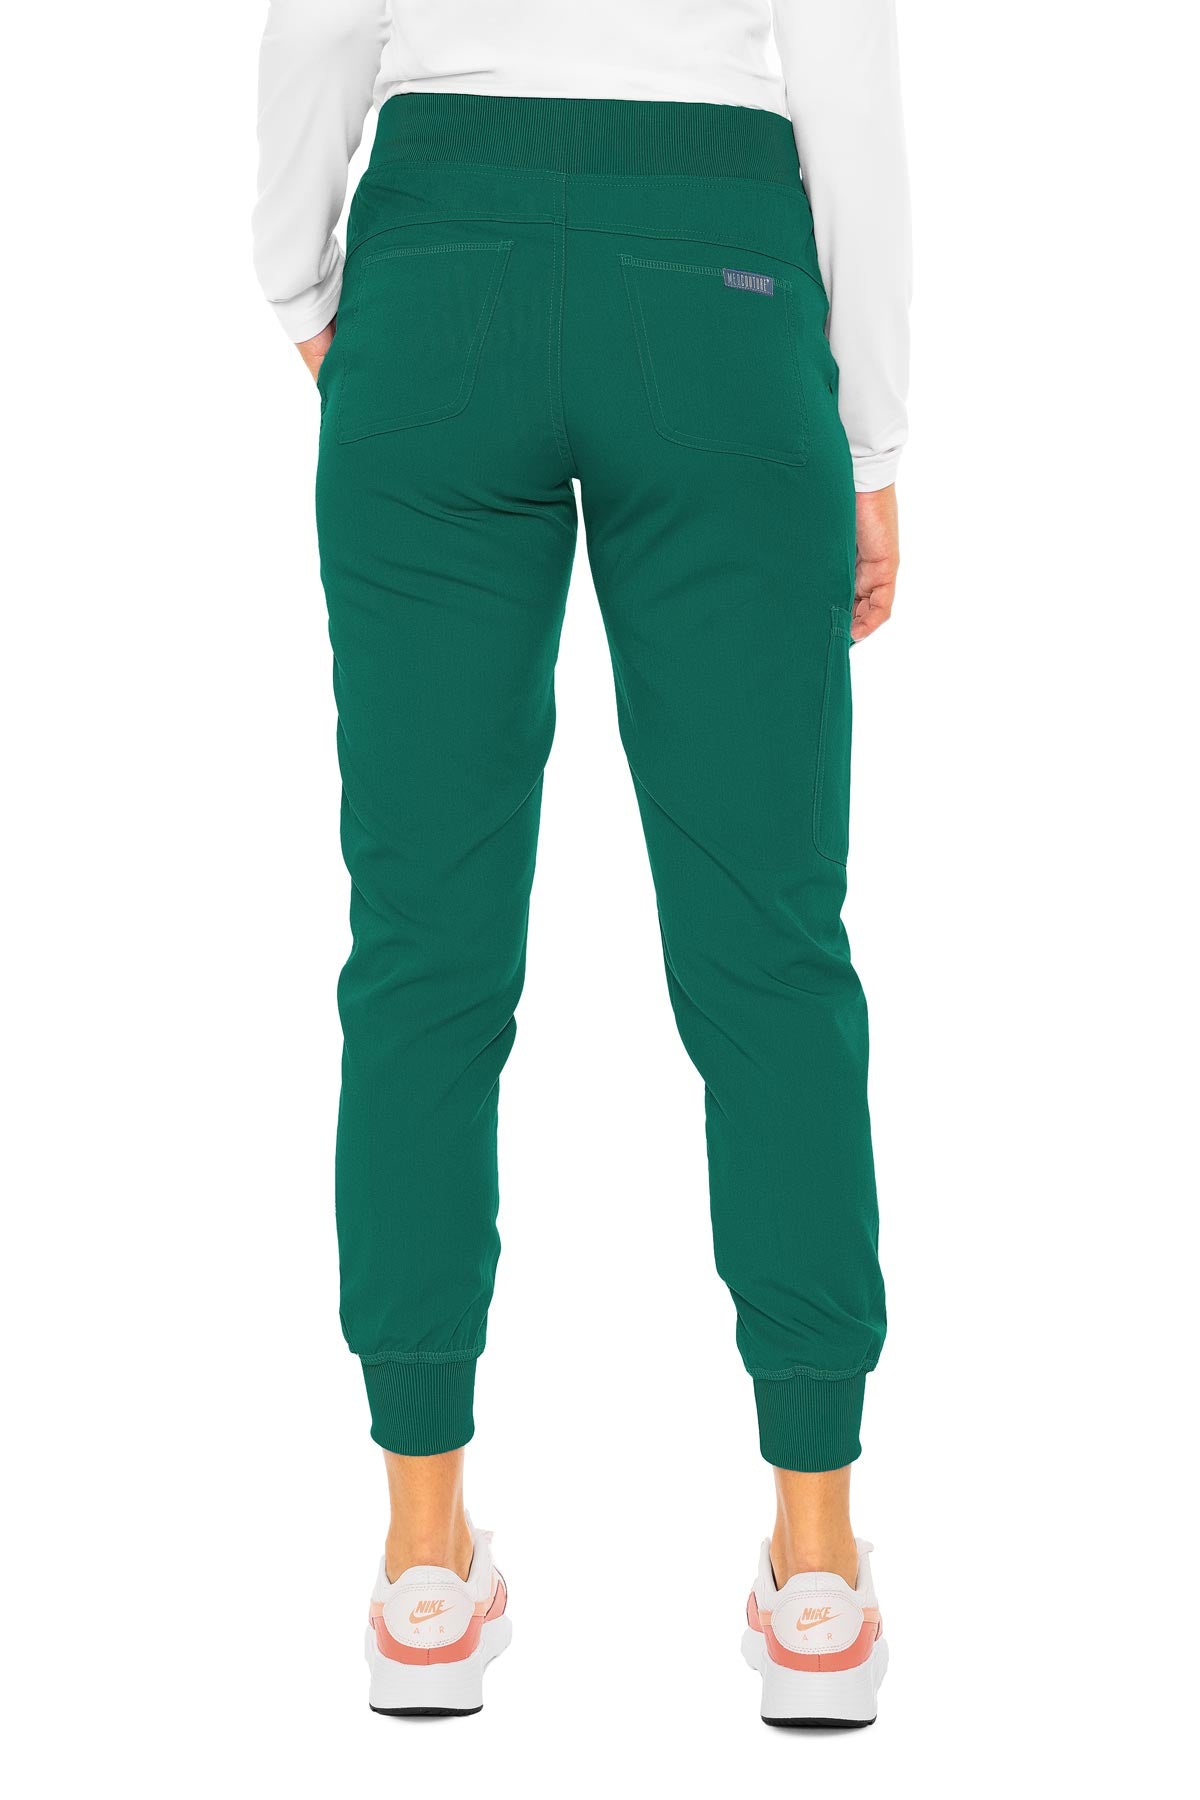 Med Couture Touch 7710 Women's Jogger Yoga Pant Hunter Back